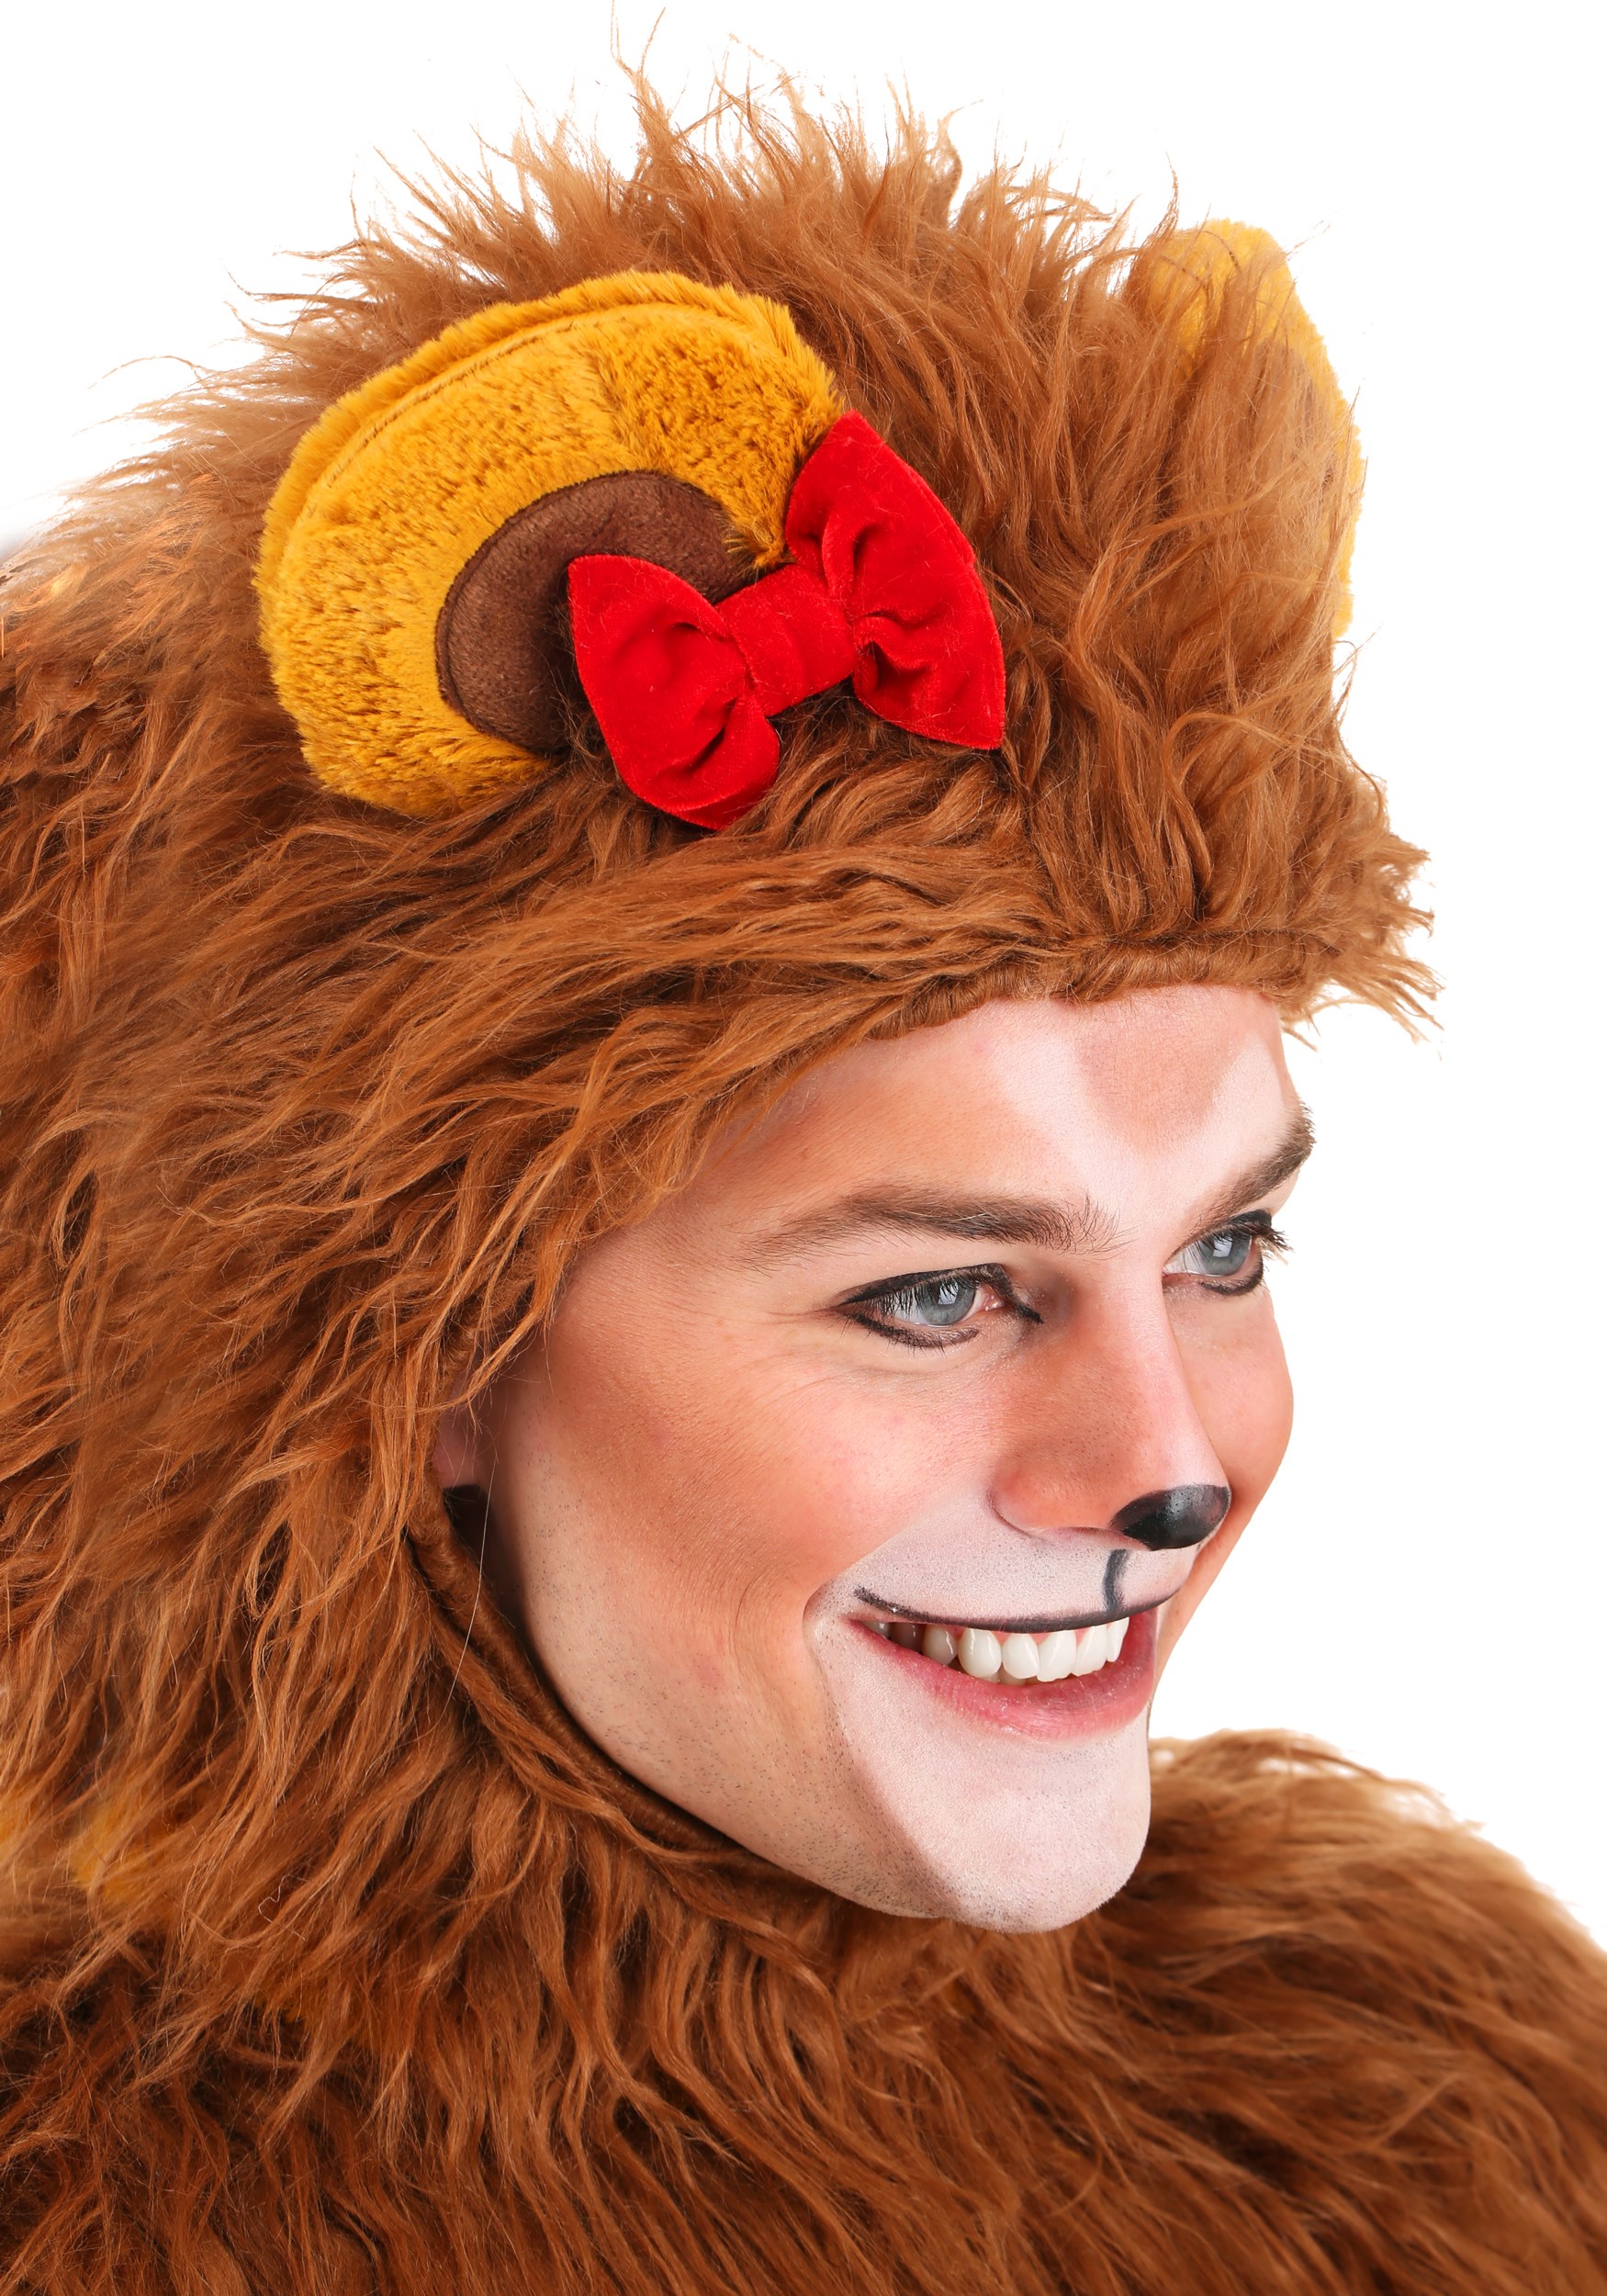 Adult Classic Storybook Lion Costume